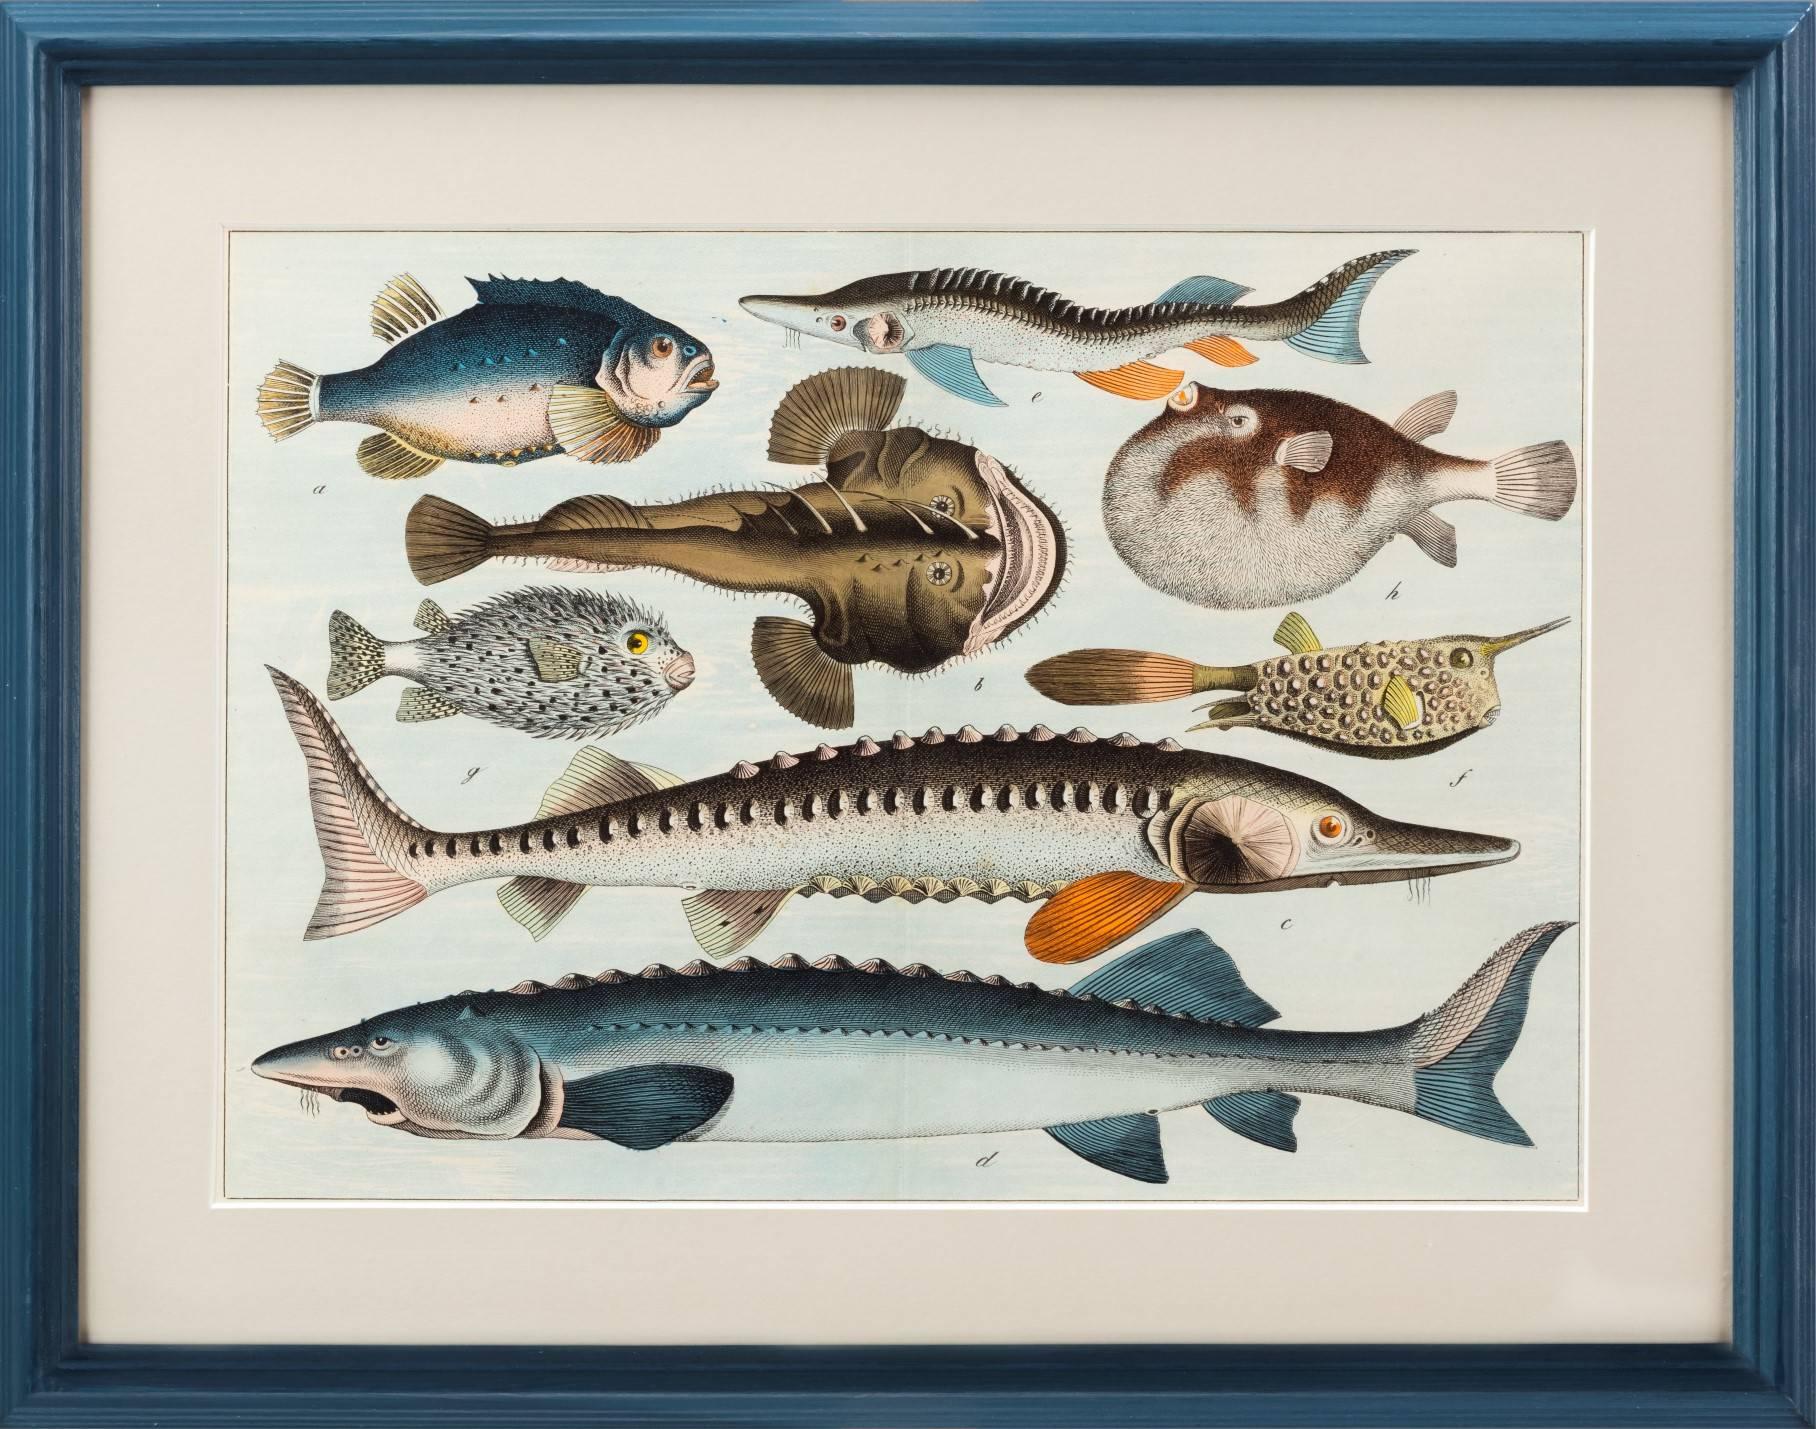 Tropical fish.

A set of nine chromolithographed prints presented in bespoke frames.

Printed in London.